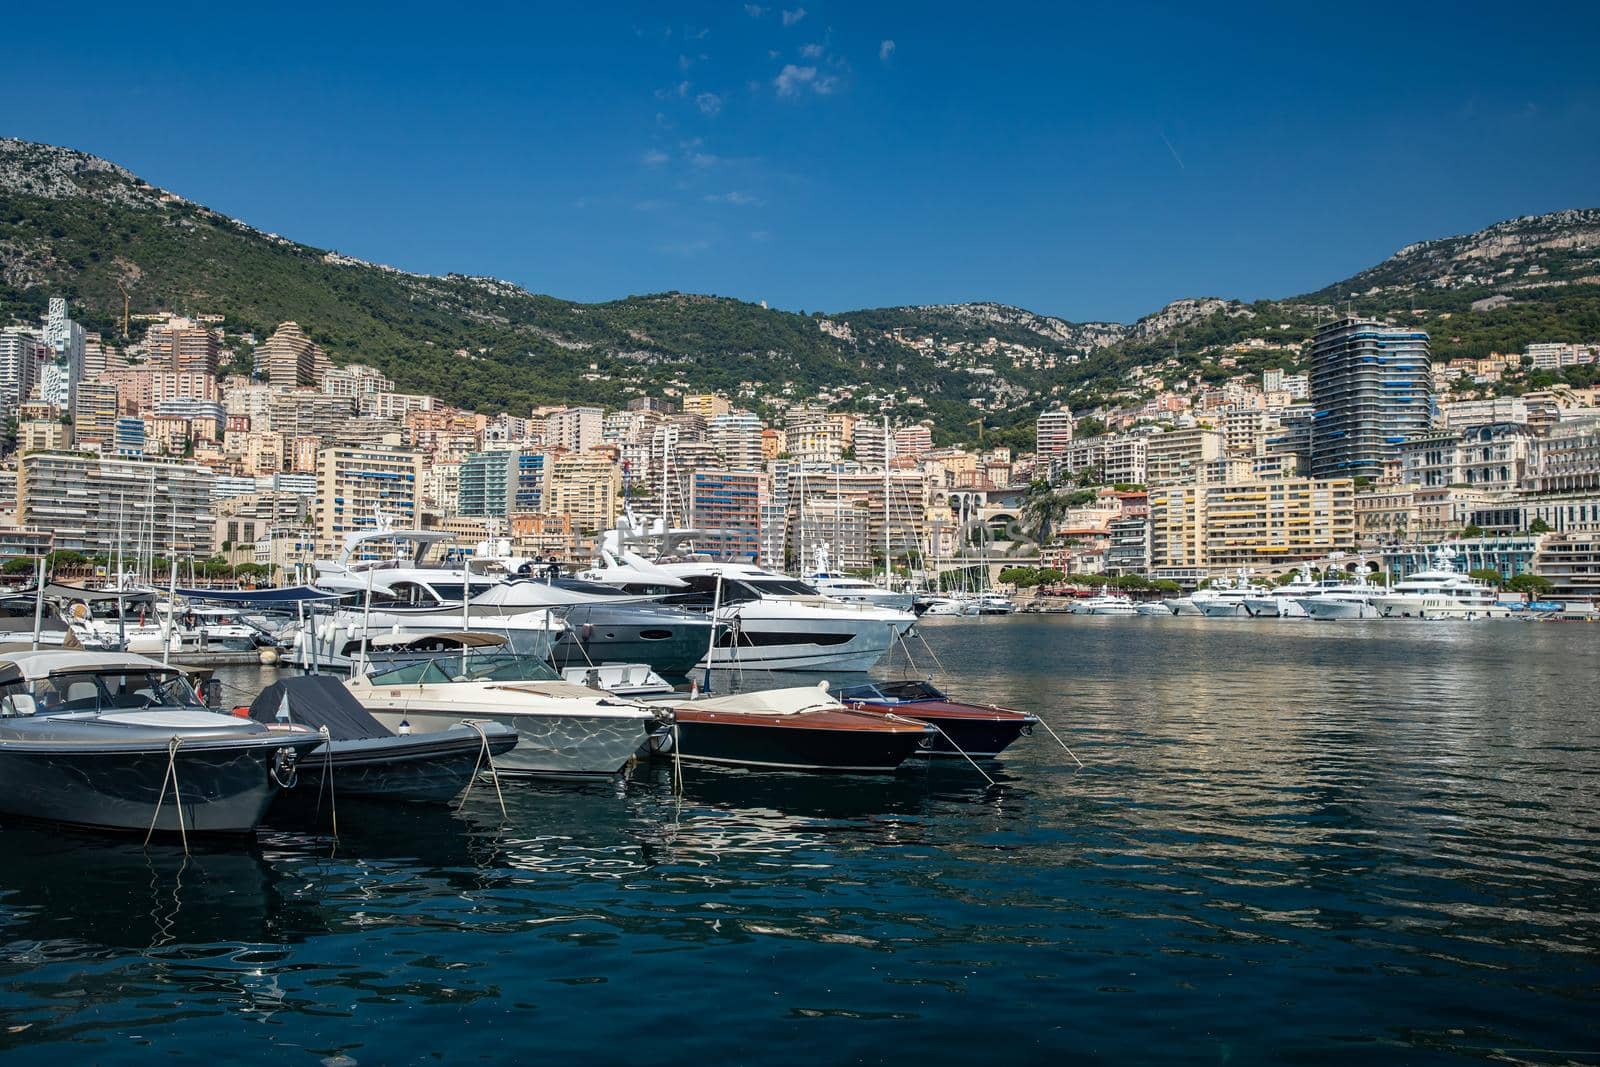 Monaco, Monte-Carlo, 06 August 2018: Tranquillity in port Hercules, is the parked boats, many yachts and boats, RIVA, Prince's Palace of Monaco, megayachts, massif of expensive real estate